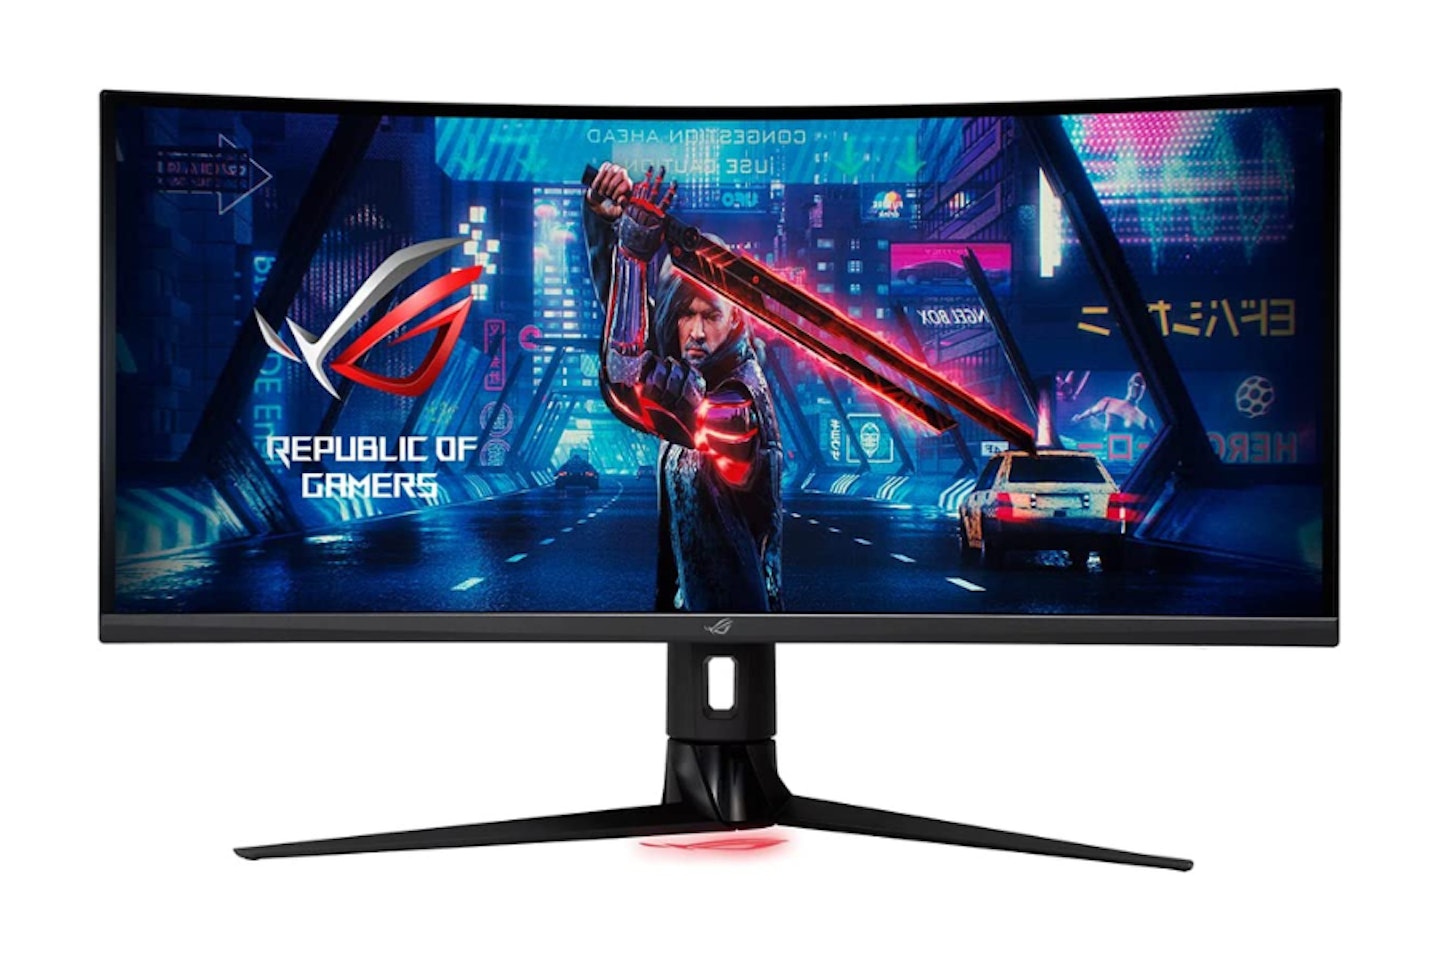 ASUS ROG Strix XG349C - possibly the best ultrawide curved monitor